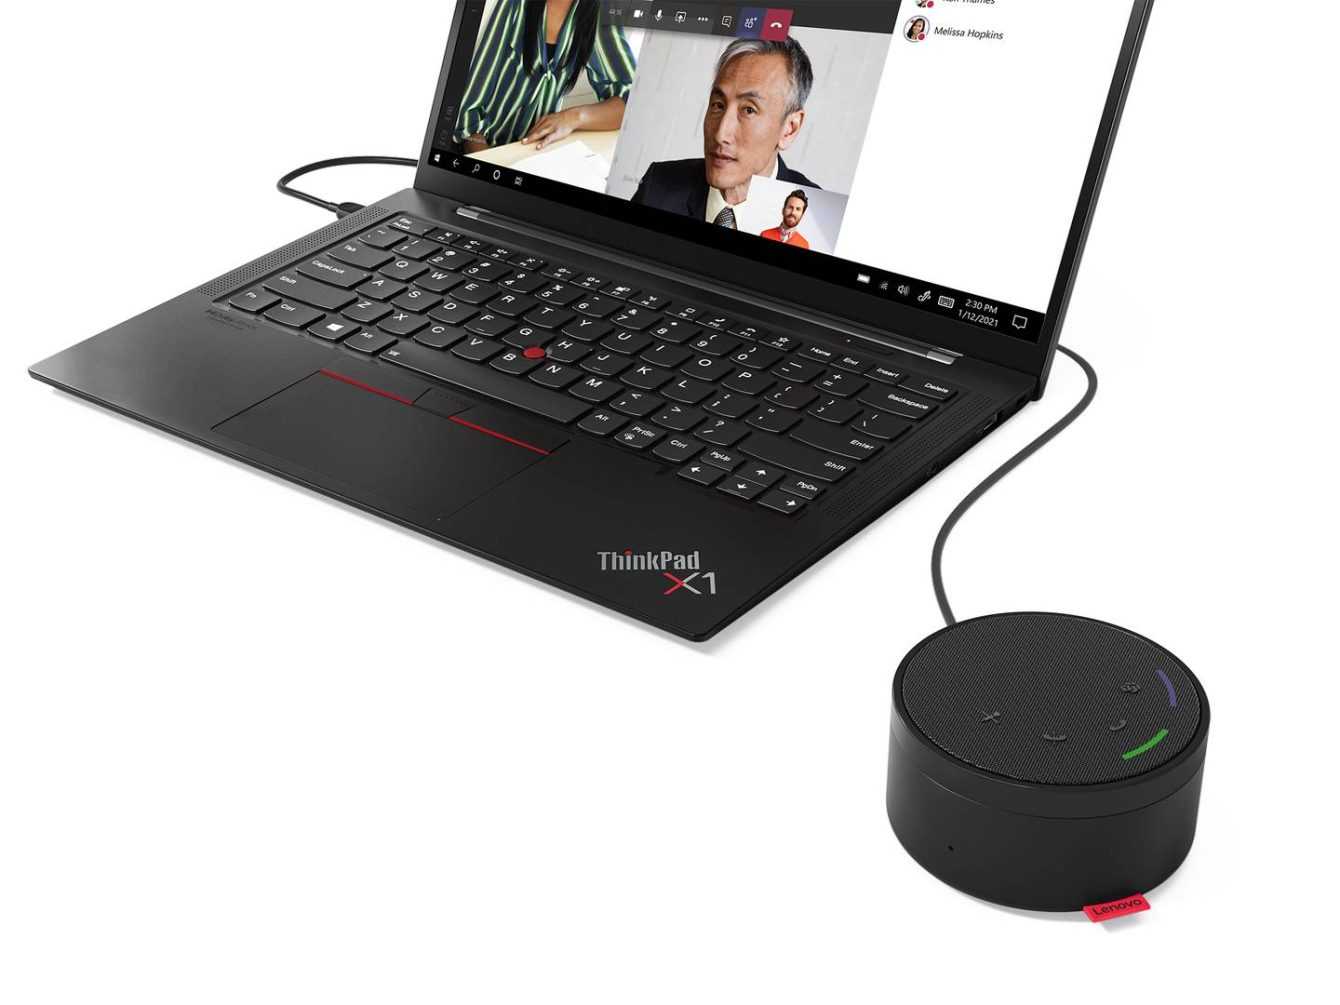 Lenovo Go: many new accessories for smart working